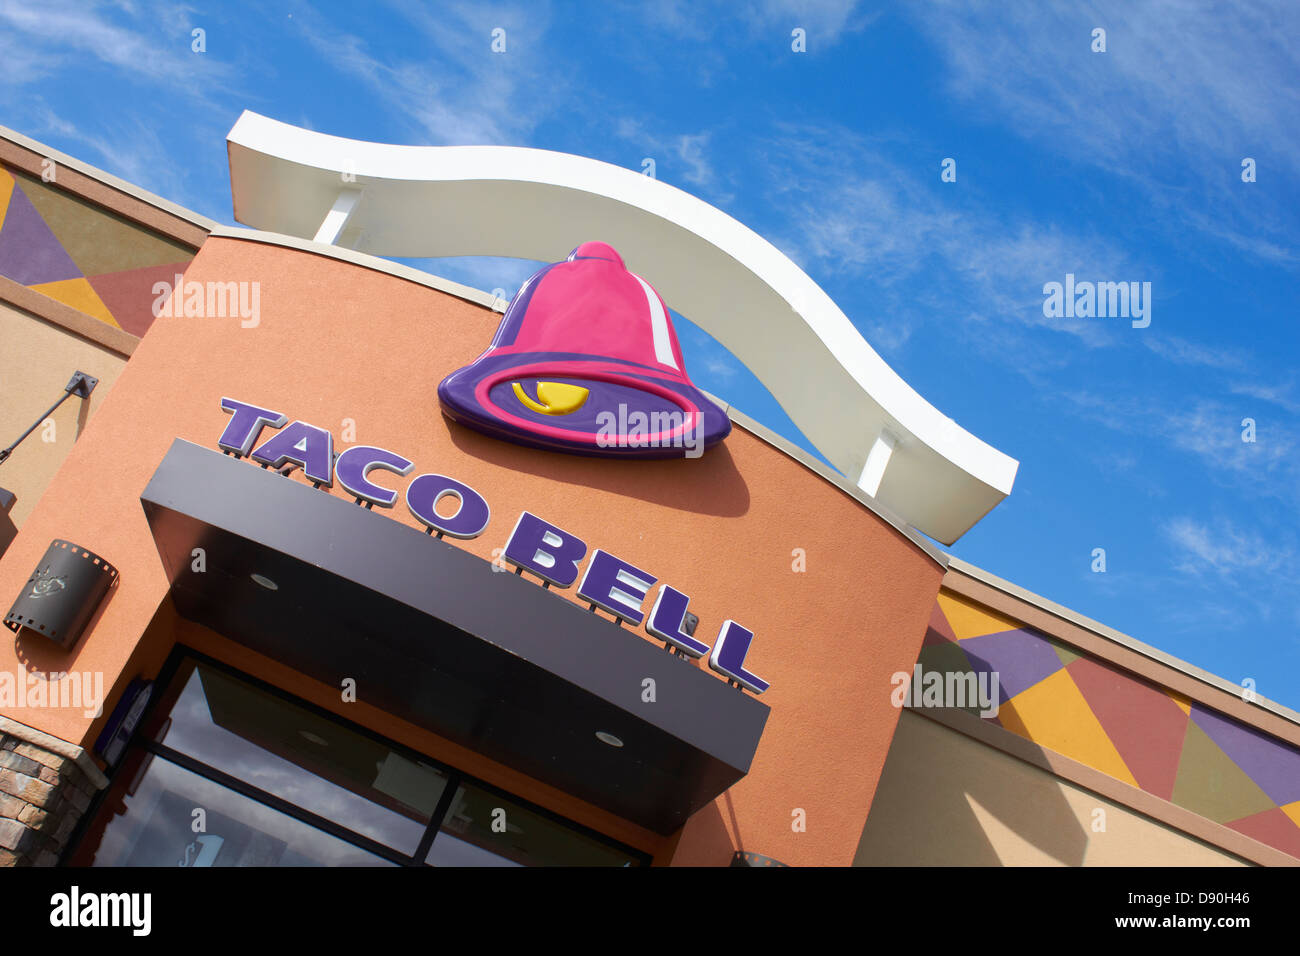 Taco Bell store front Stock Photo